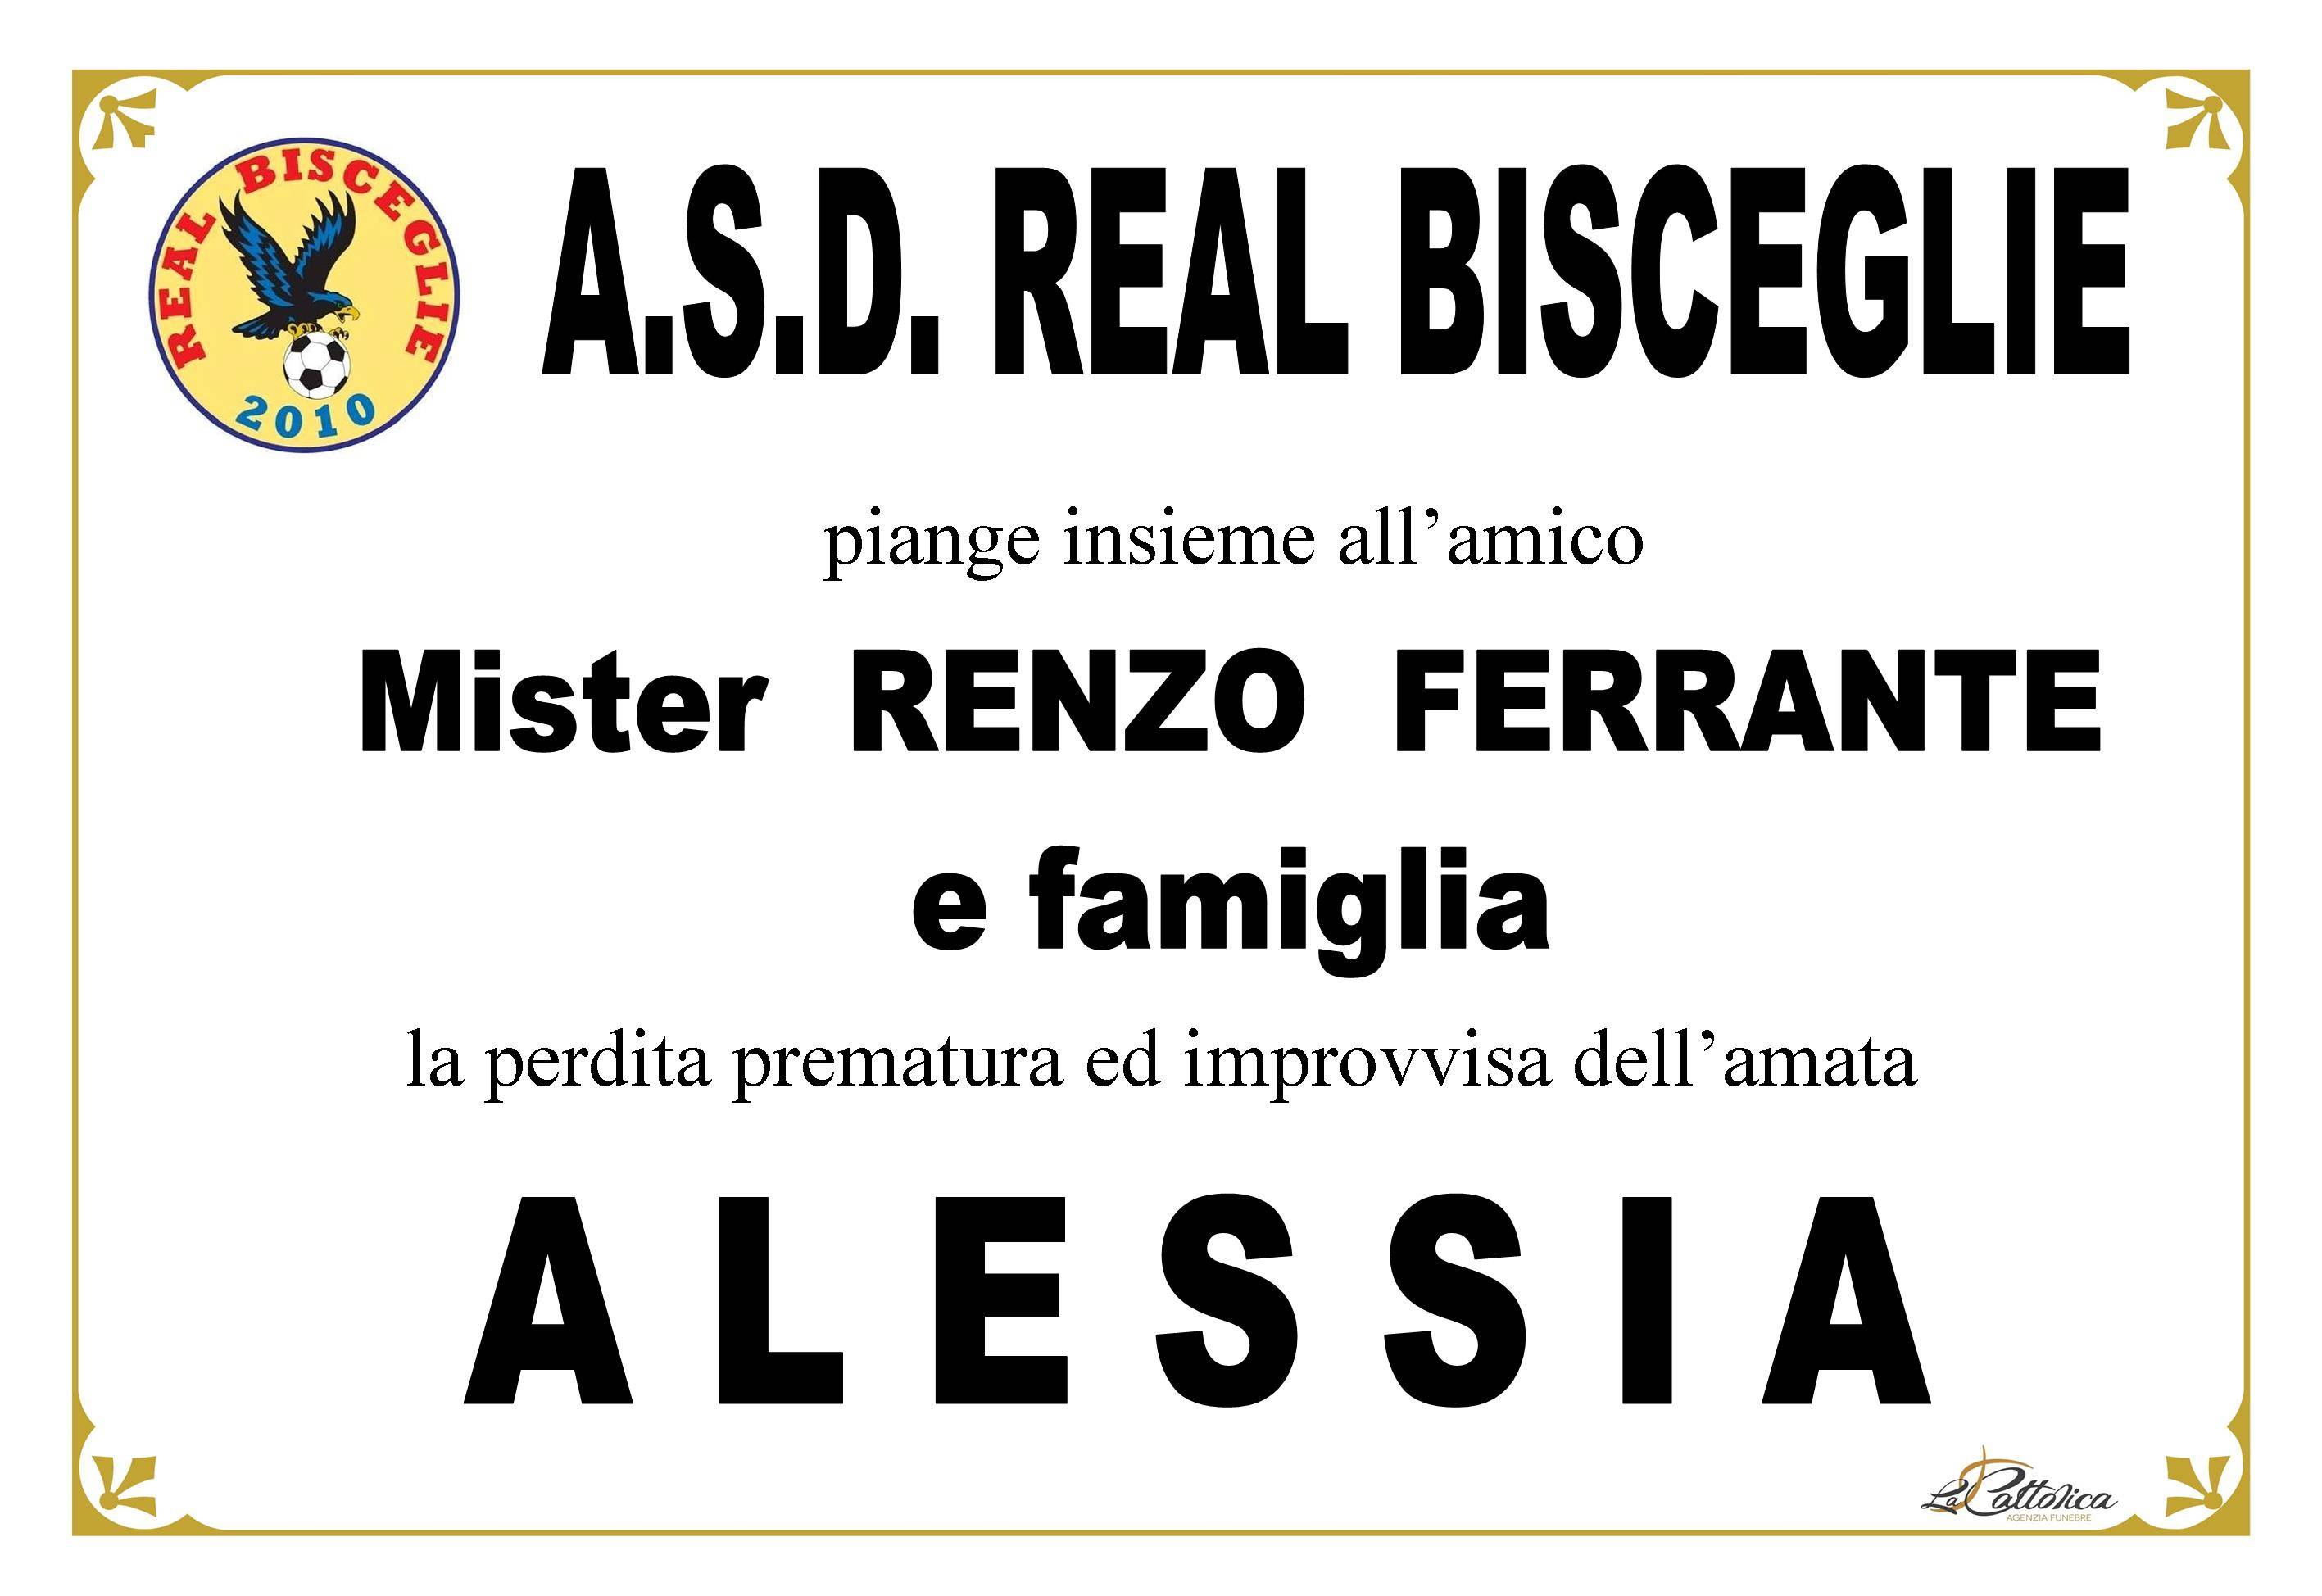 A.S.D. Real Bisceglie